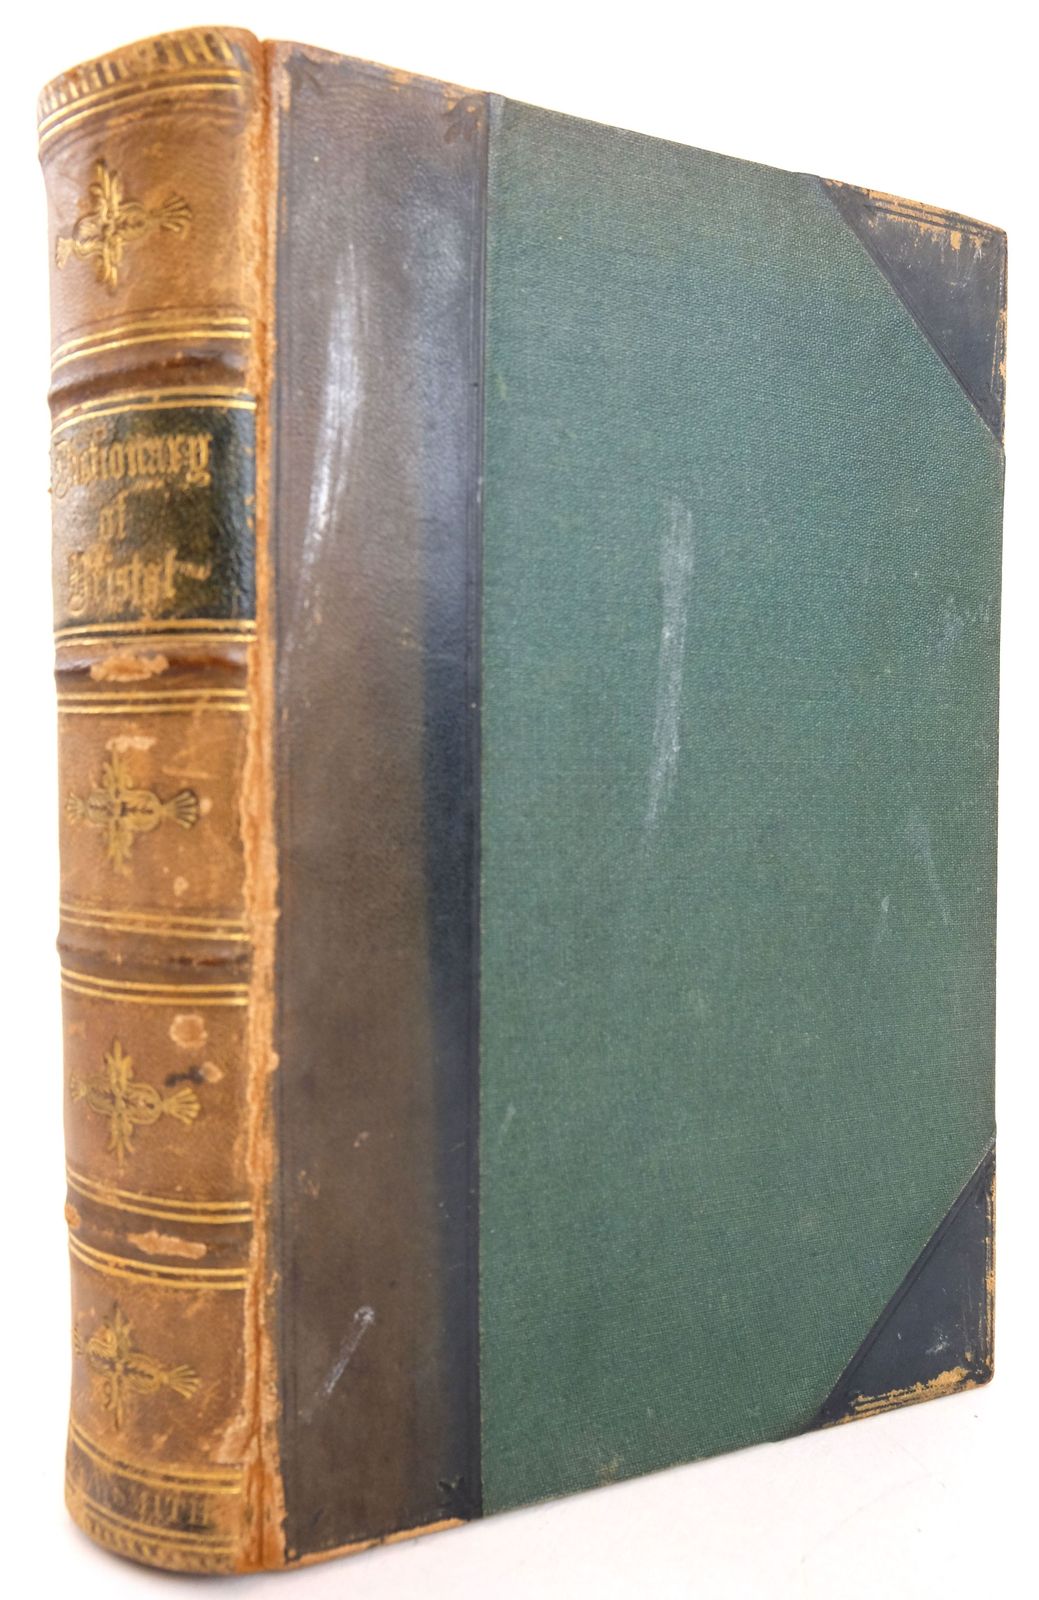 Photo of ARROWSMITH'S DICTIONARY OF BRISTOL published by J.W. Arrowsmith (STOCK CODE: 1819650)  for sale by Stella & Rose's Books